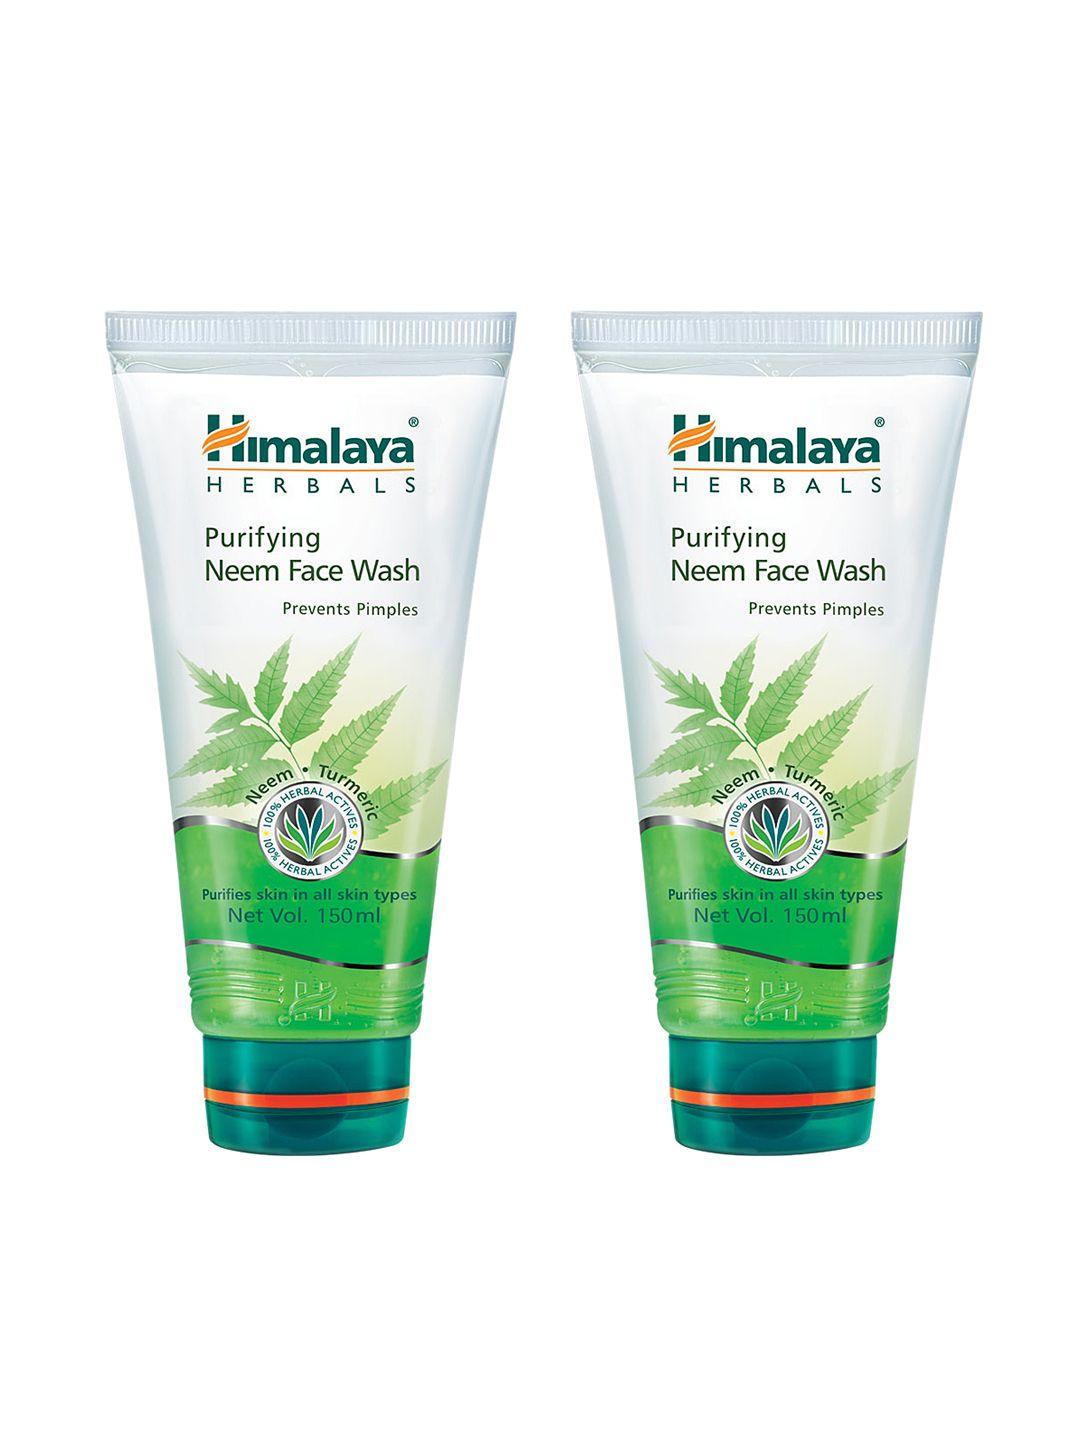 himalaya set of 2 purifying neem face wash for acne-prone skin - 150 ml each